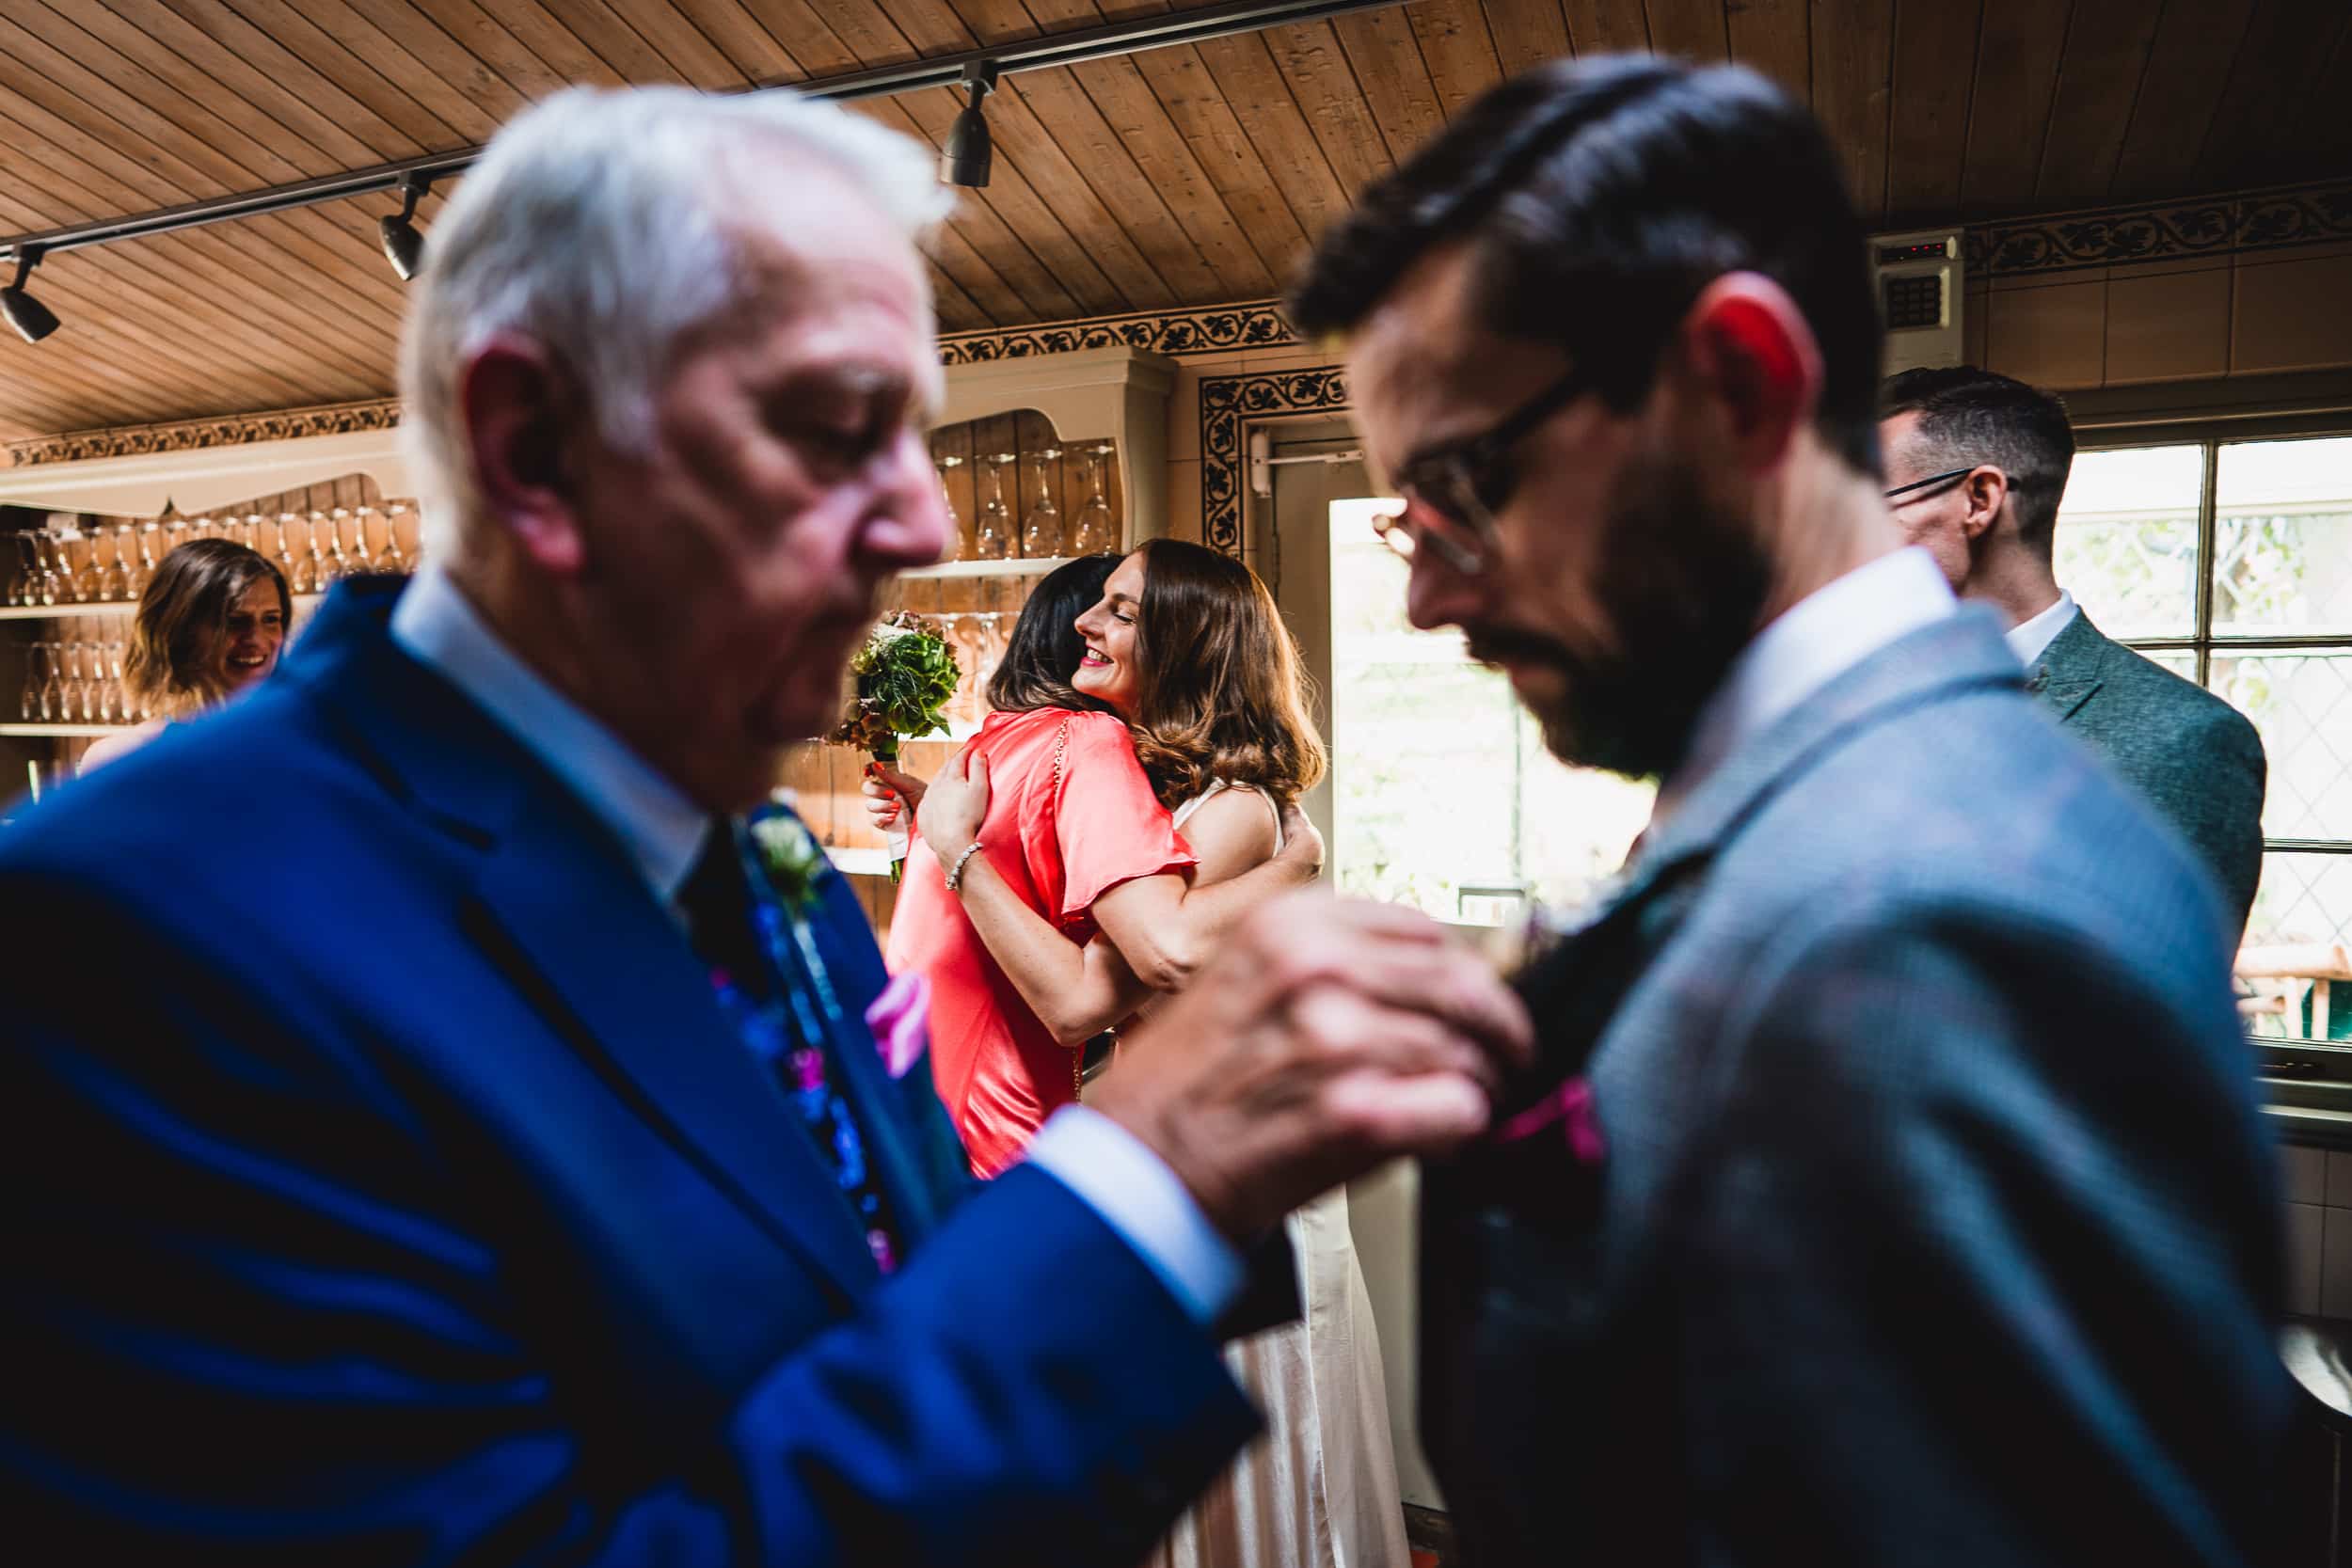 At a Surrey wedding, a man in a suit meticulously adjusts another man's tie at Ridge Farm.